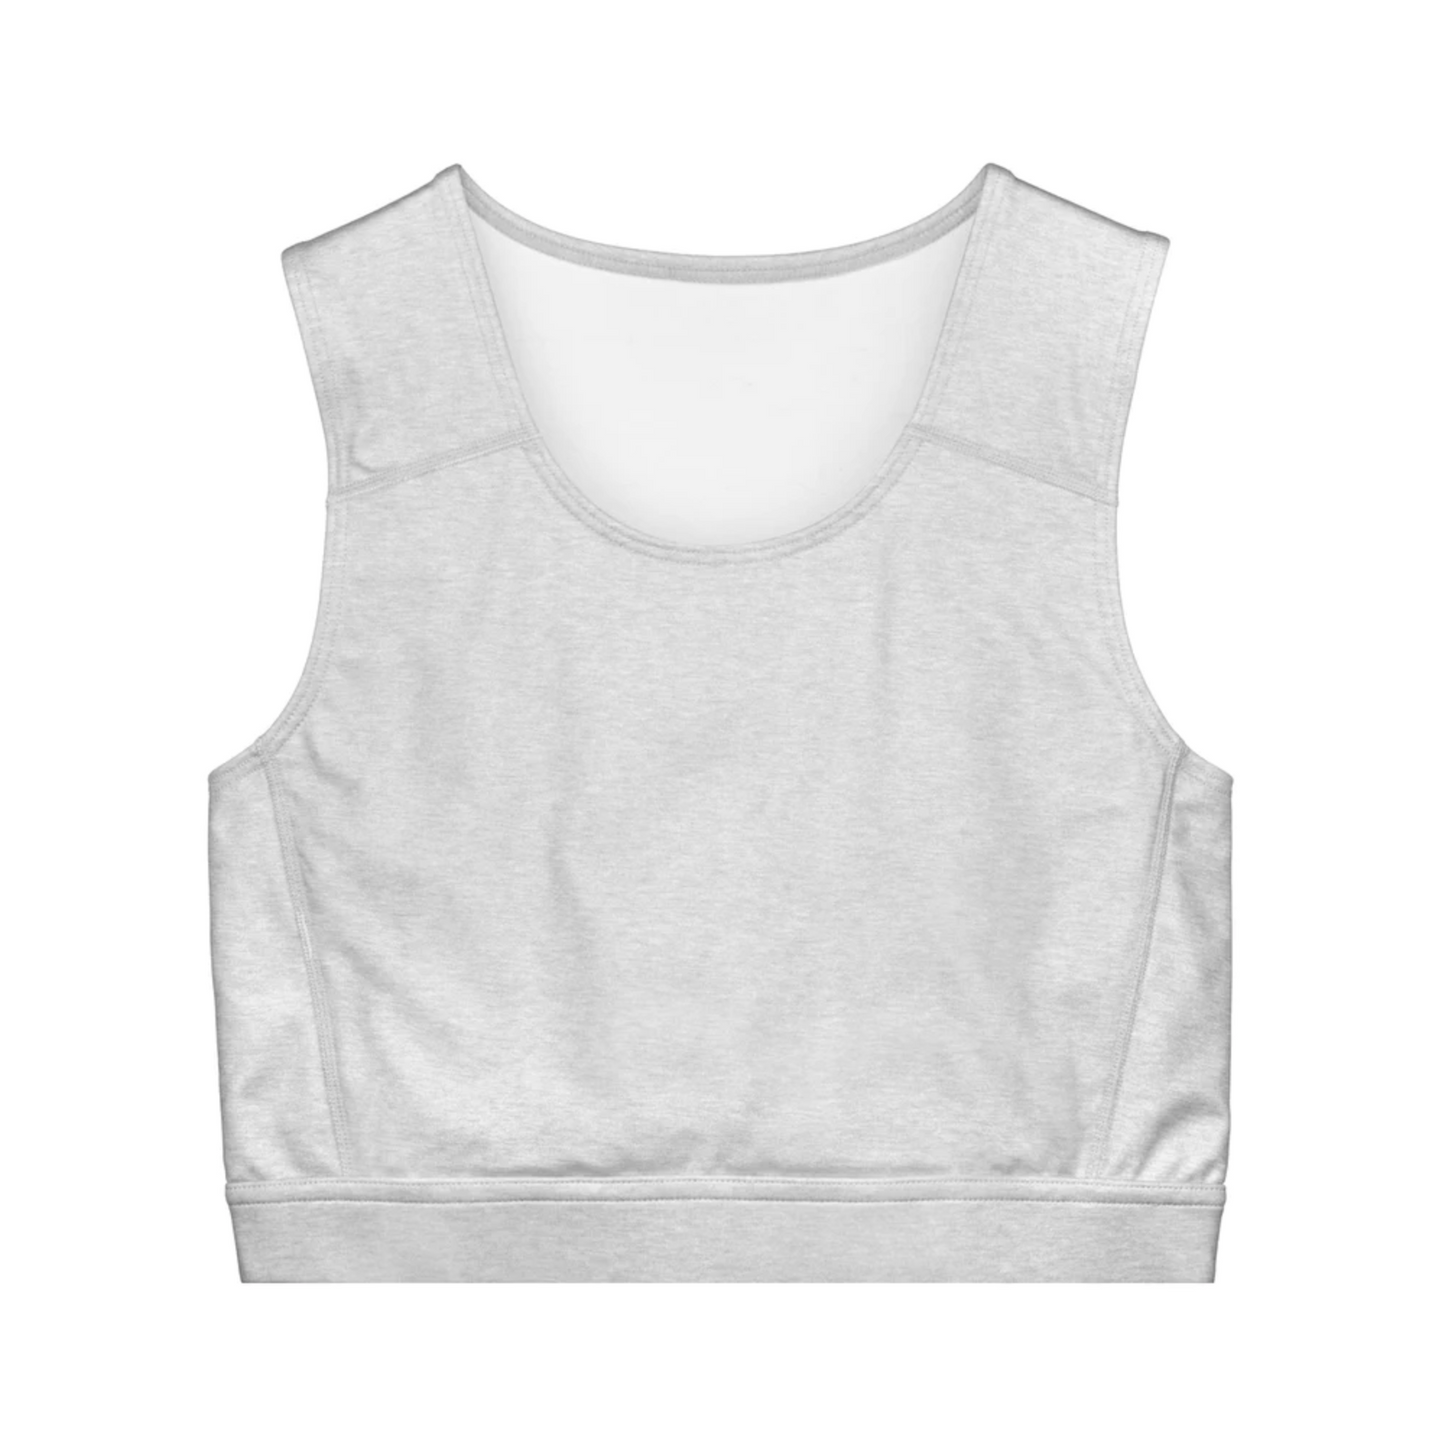 Compression Top - Light Marle Gray